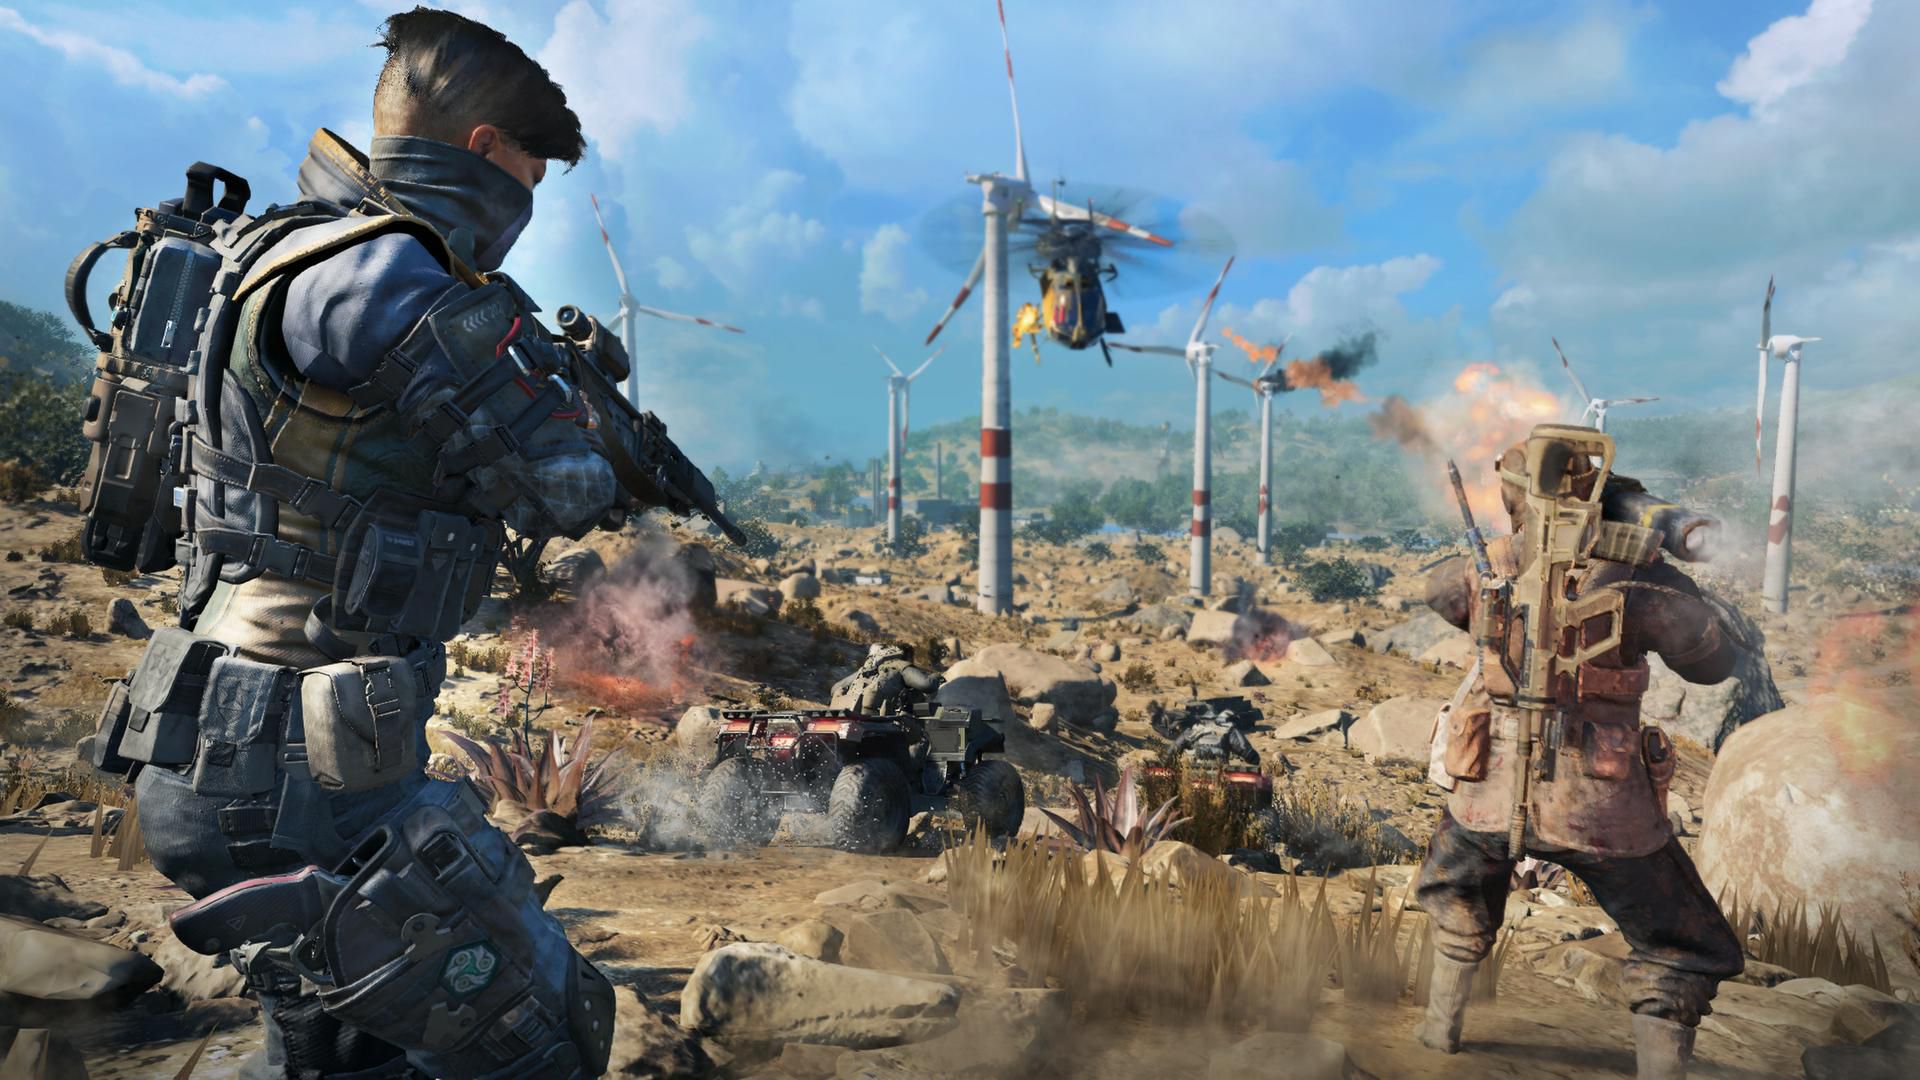 Call of Duty' launches first ever mobile game - here's what you